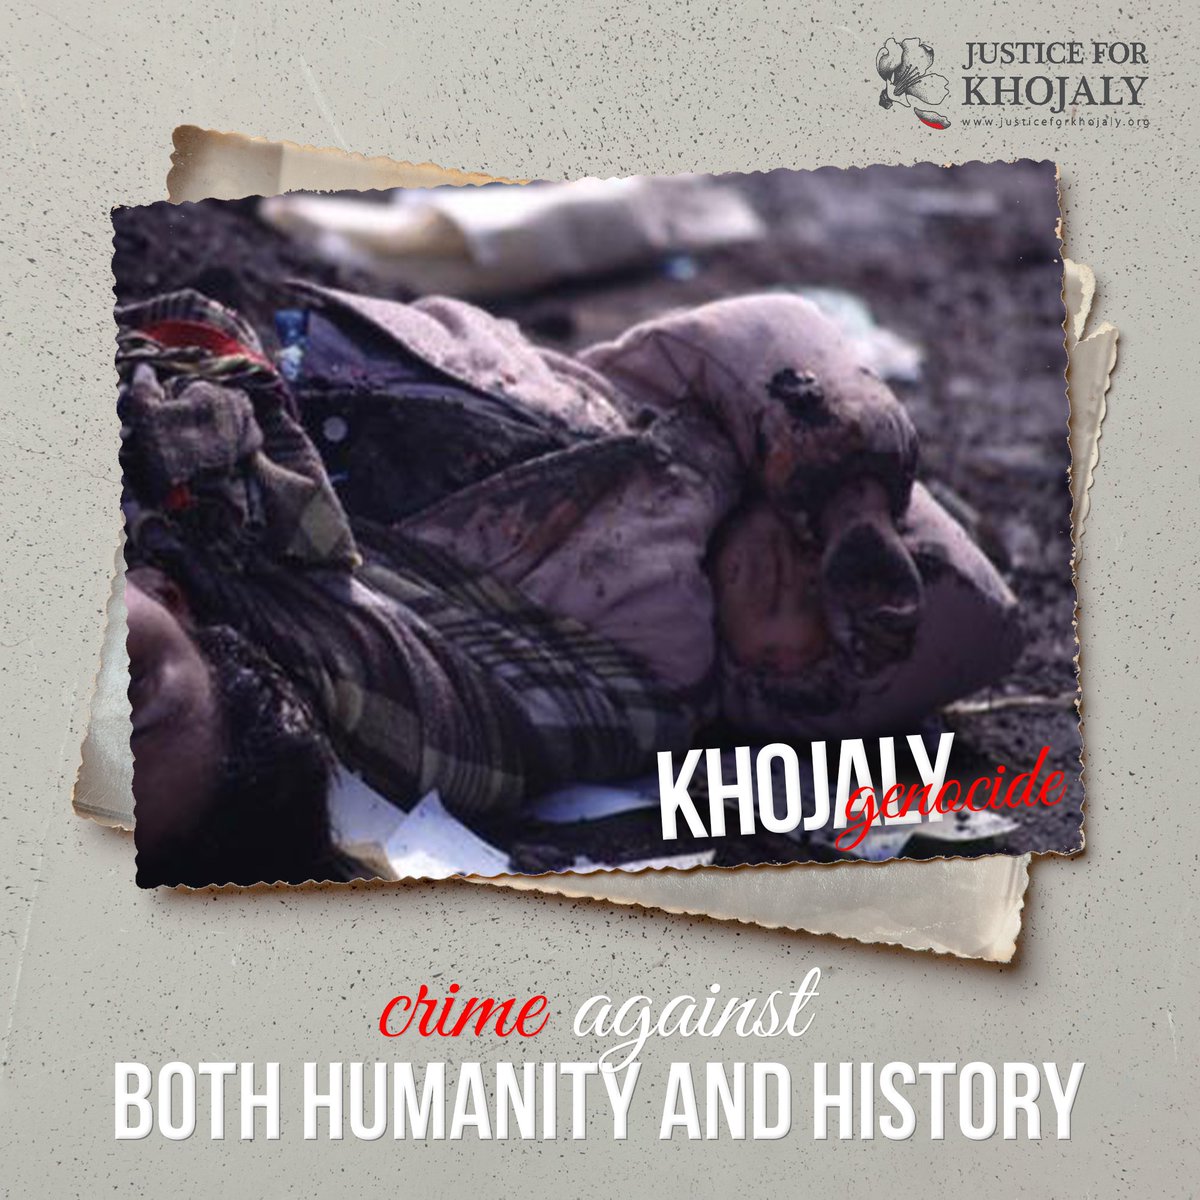 The #KhojalyGenocide committed by the Armenian units is a violation of #humanrights,as innocent #civilians were deliberately targeted&killed. The right to life is a fundamental human right protected by #internationallaw, &the intentional killing of civilians violates this right.